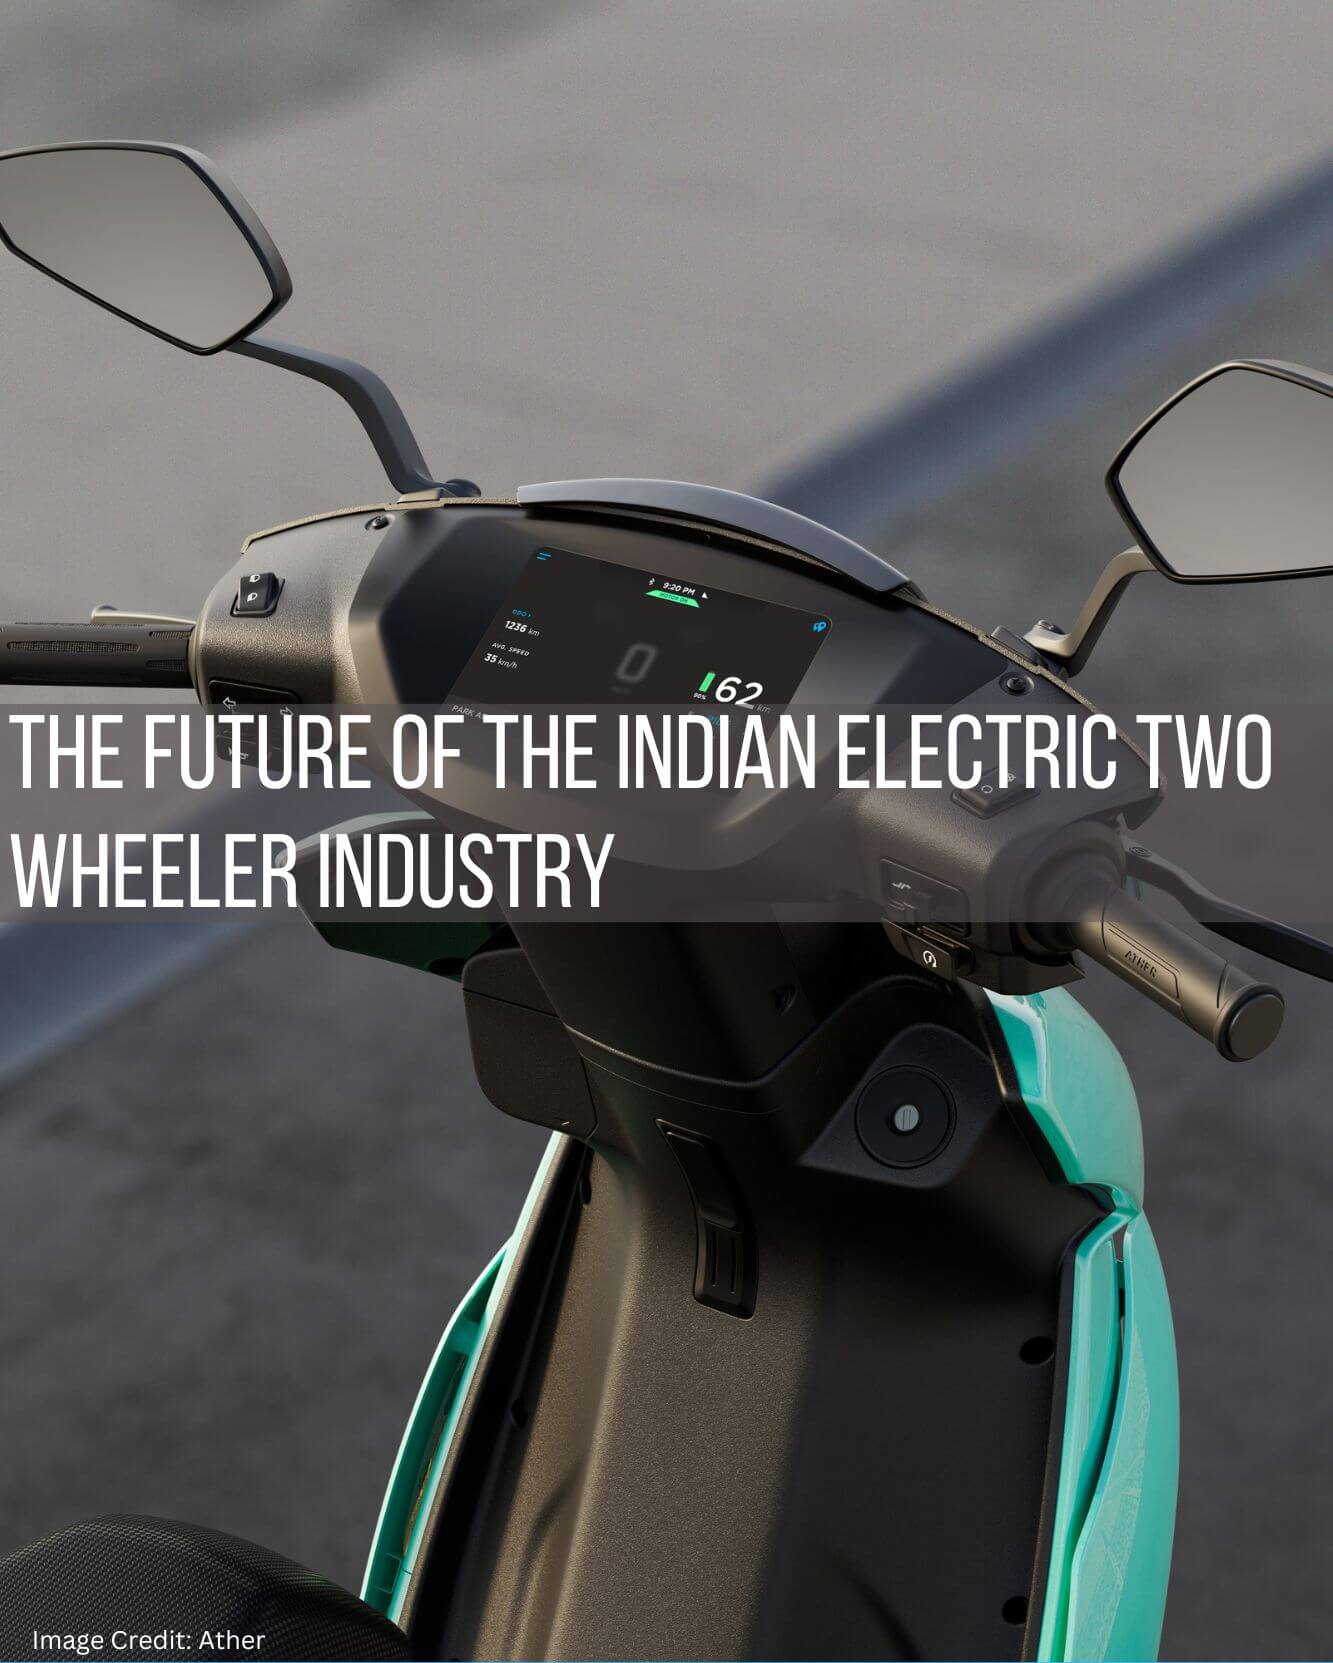 The Future of the Indian Electric Two Wheeler Industry